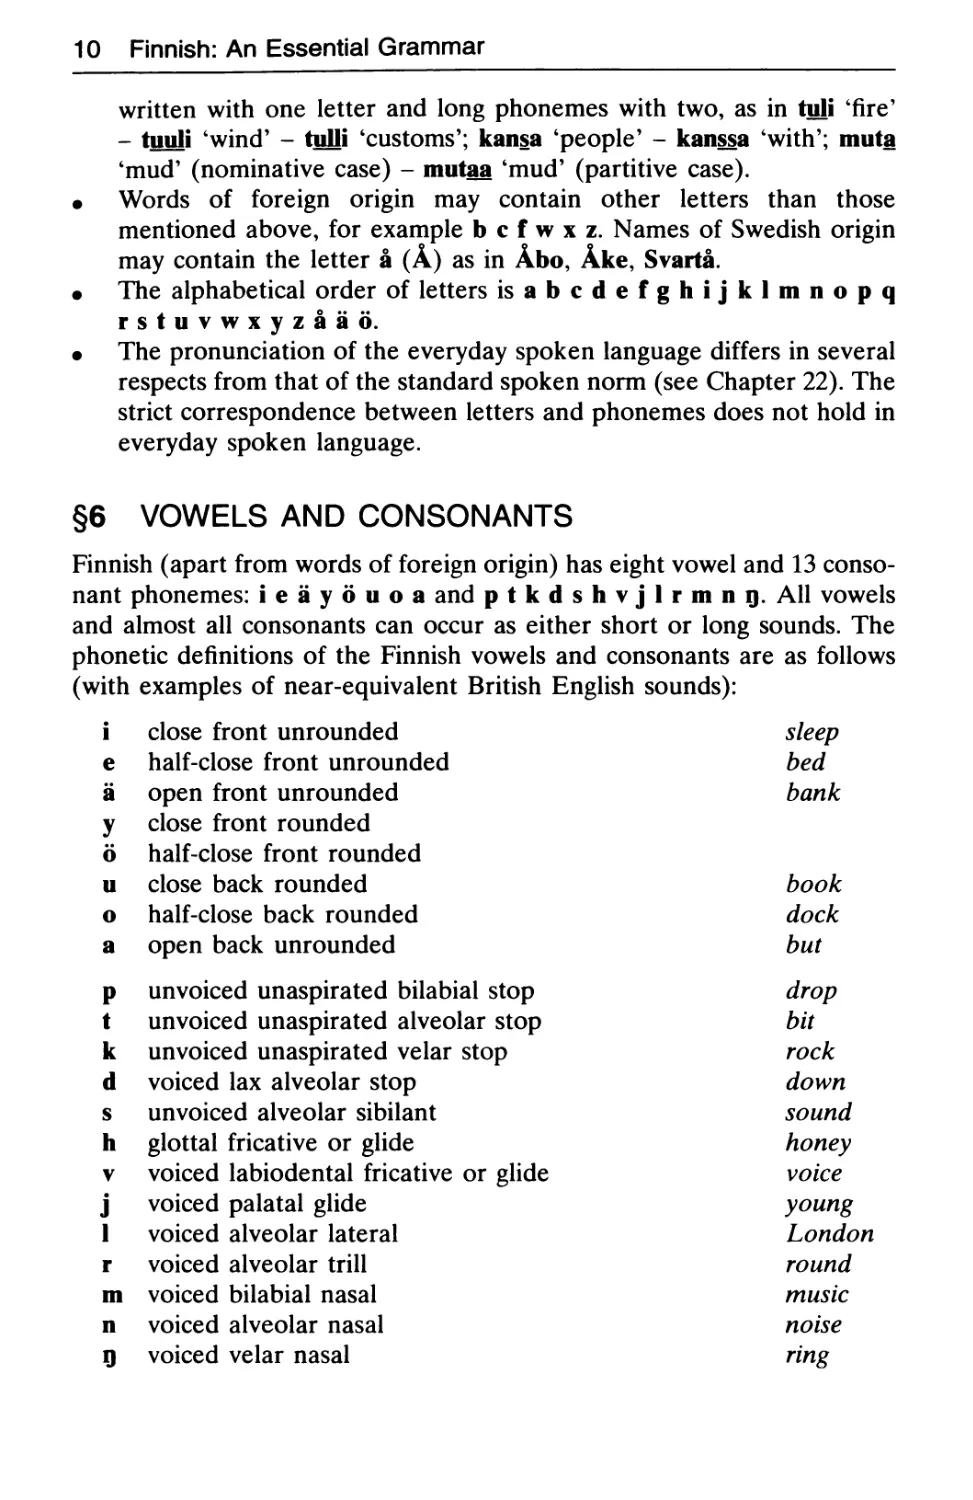 §6 Vowels and consonants